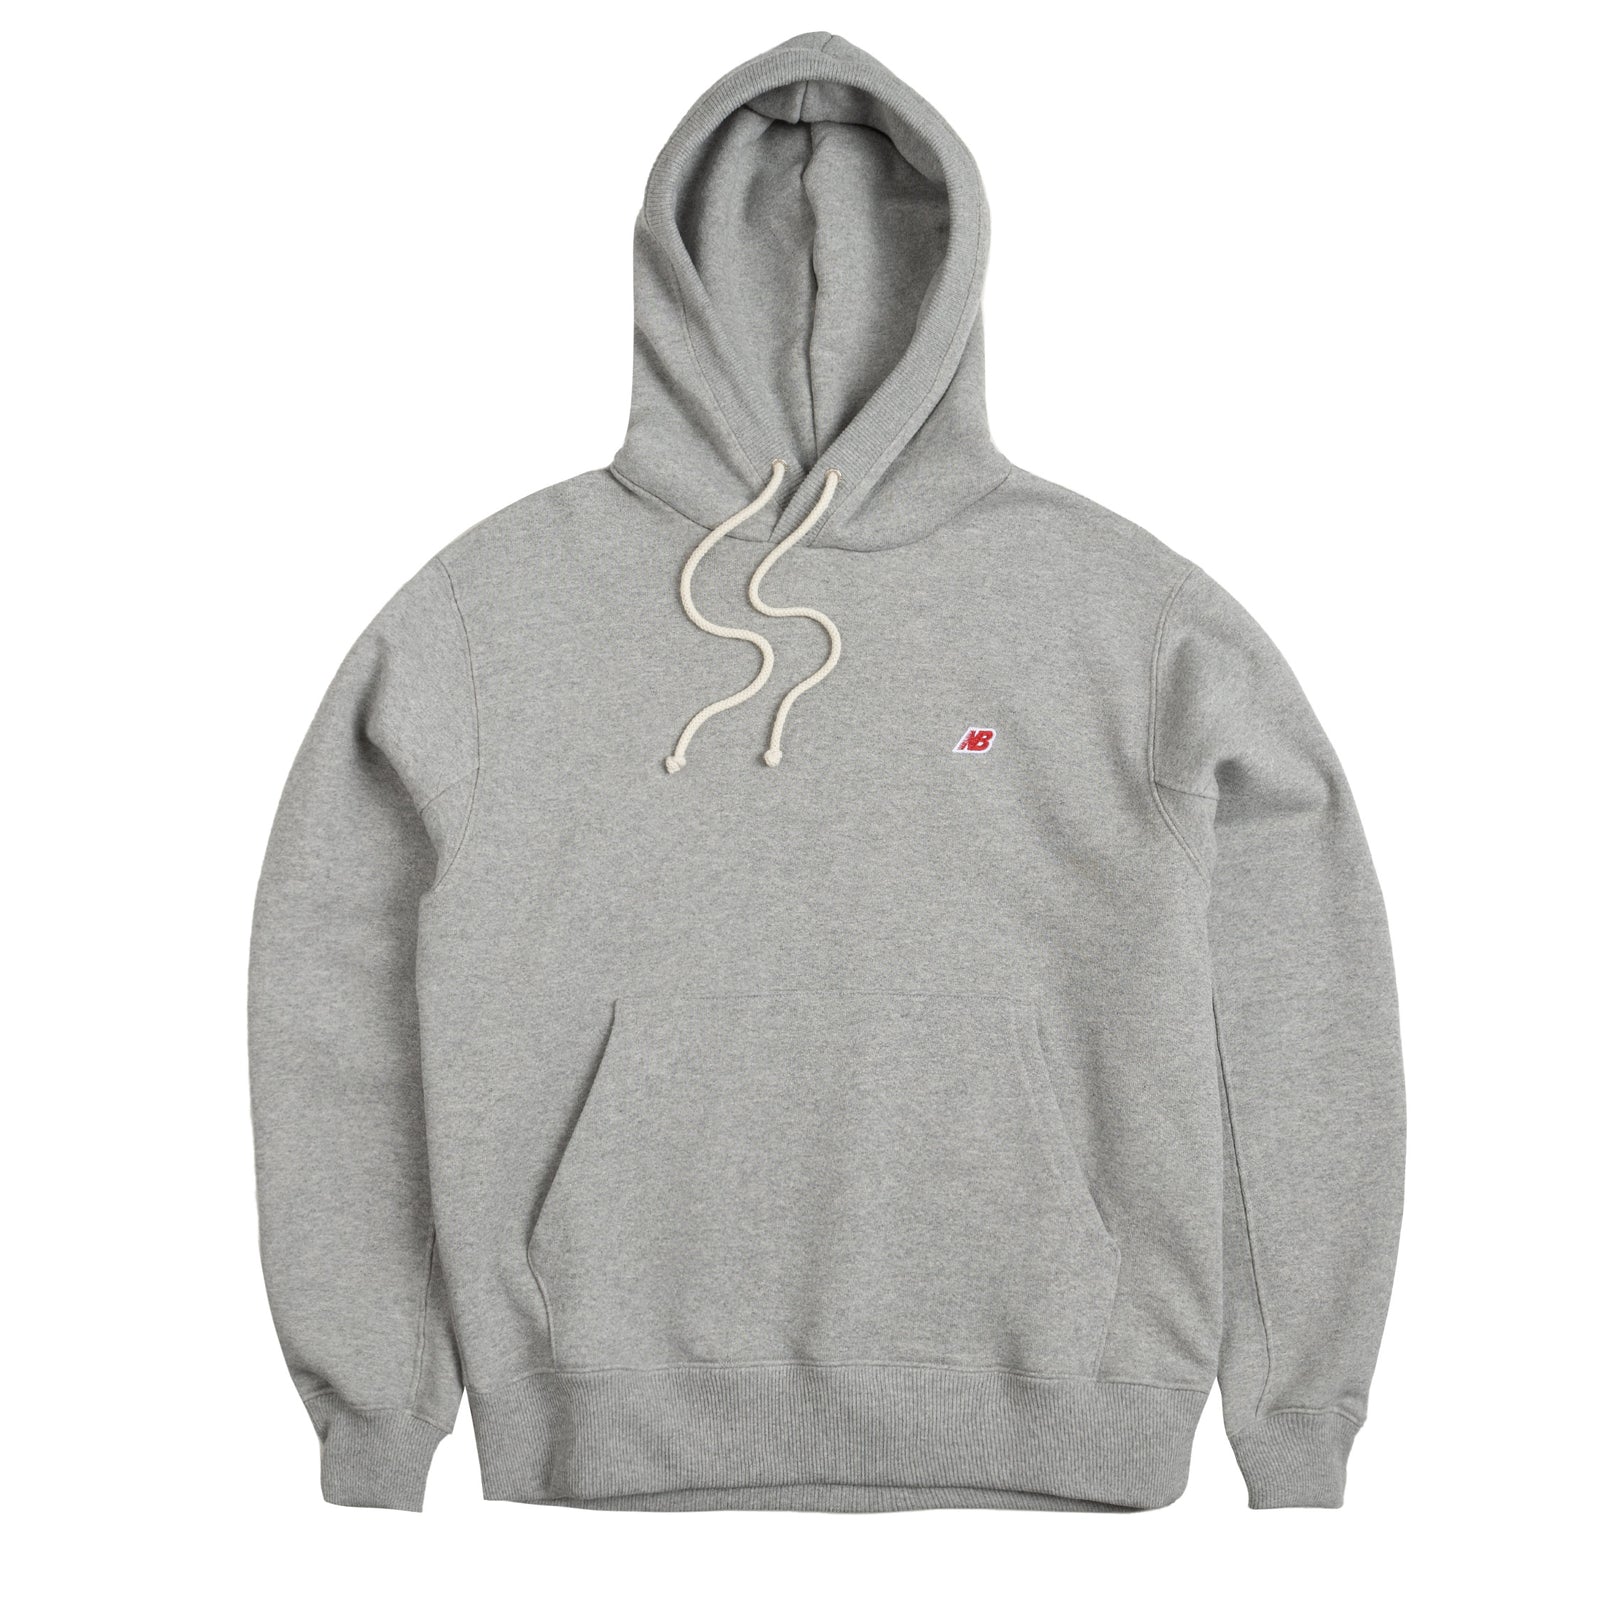 New Balance Core Hoodie
Made in USA
Athletic Grey